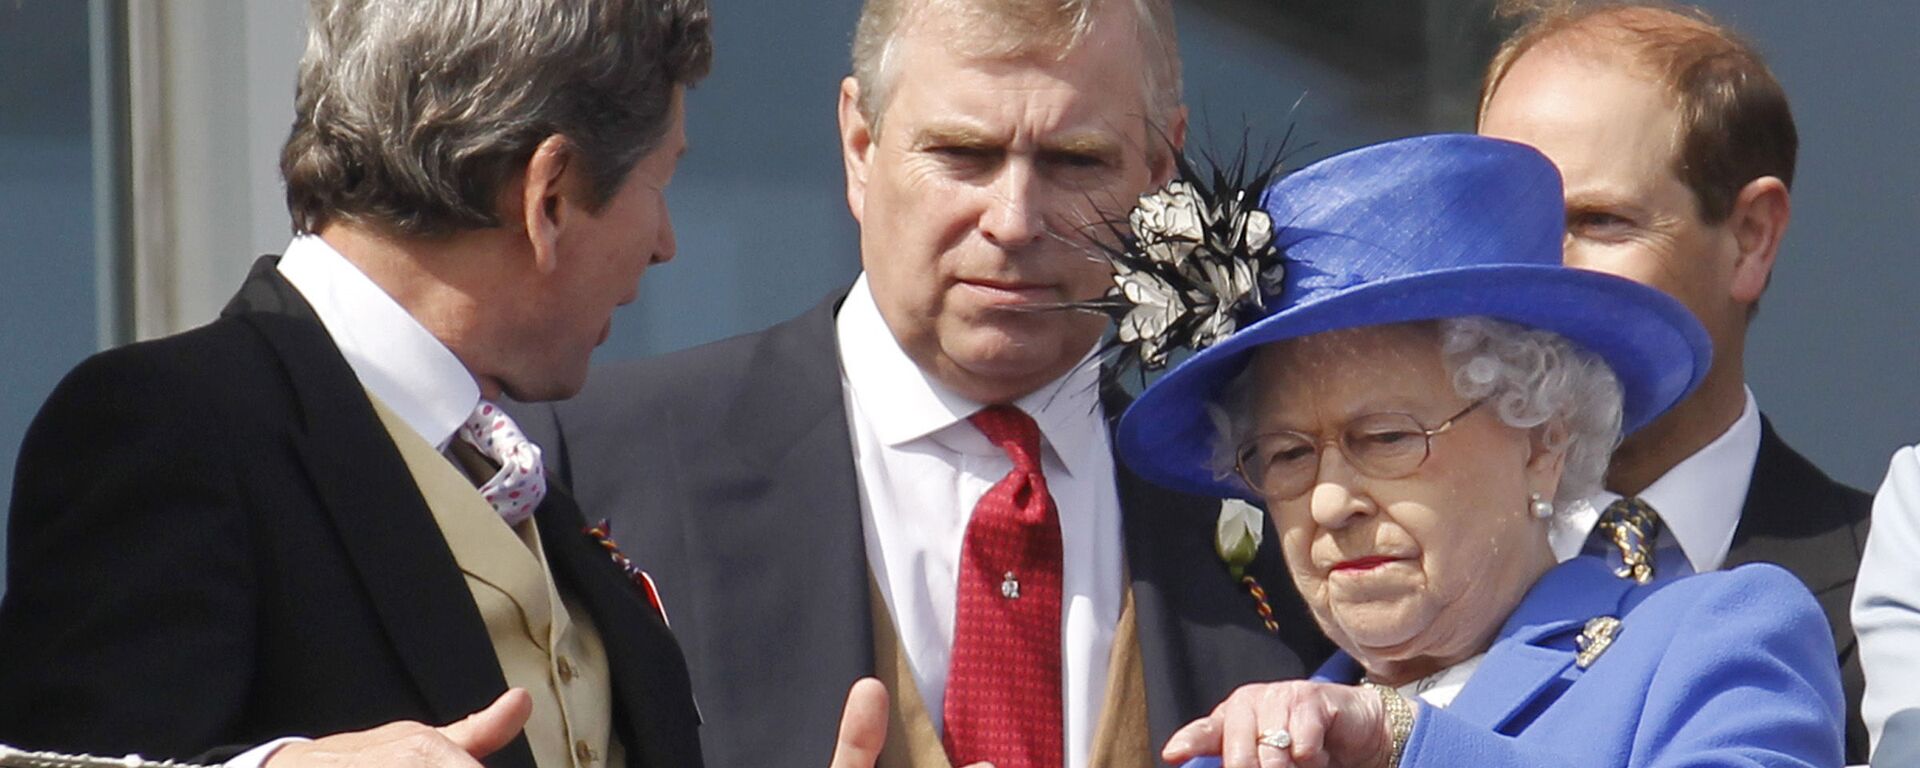 Britain's Queen Elizabeth II, right, talks to her son Prince Andrew, center, as she looks out from the balcony at the end of the Epsom Derby horse race at Epsom racecourse,  England at the start of a four-day Diamond Jubilee celebration to mark the 60th anniversary of  Queen Elizabeth II accession to the throne, Saturday, June 2, 2012 - Sputnik International, 1920, 08.01.2022